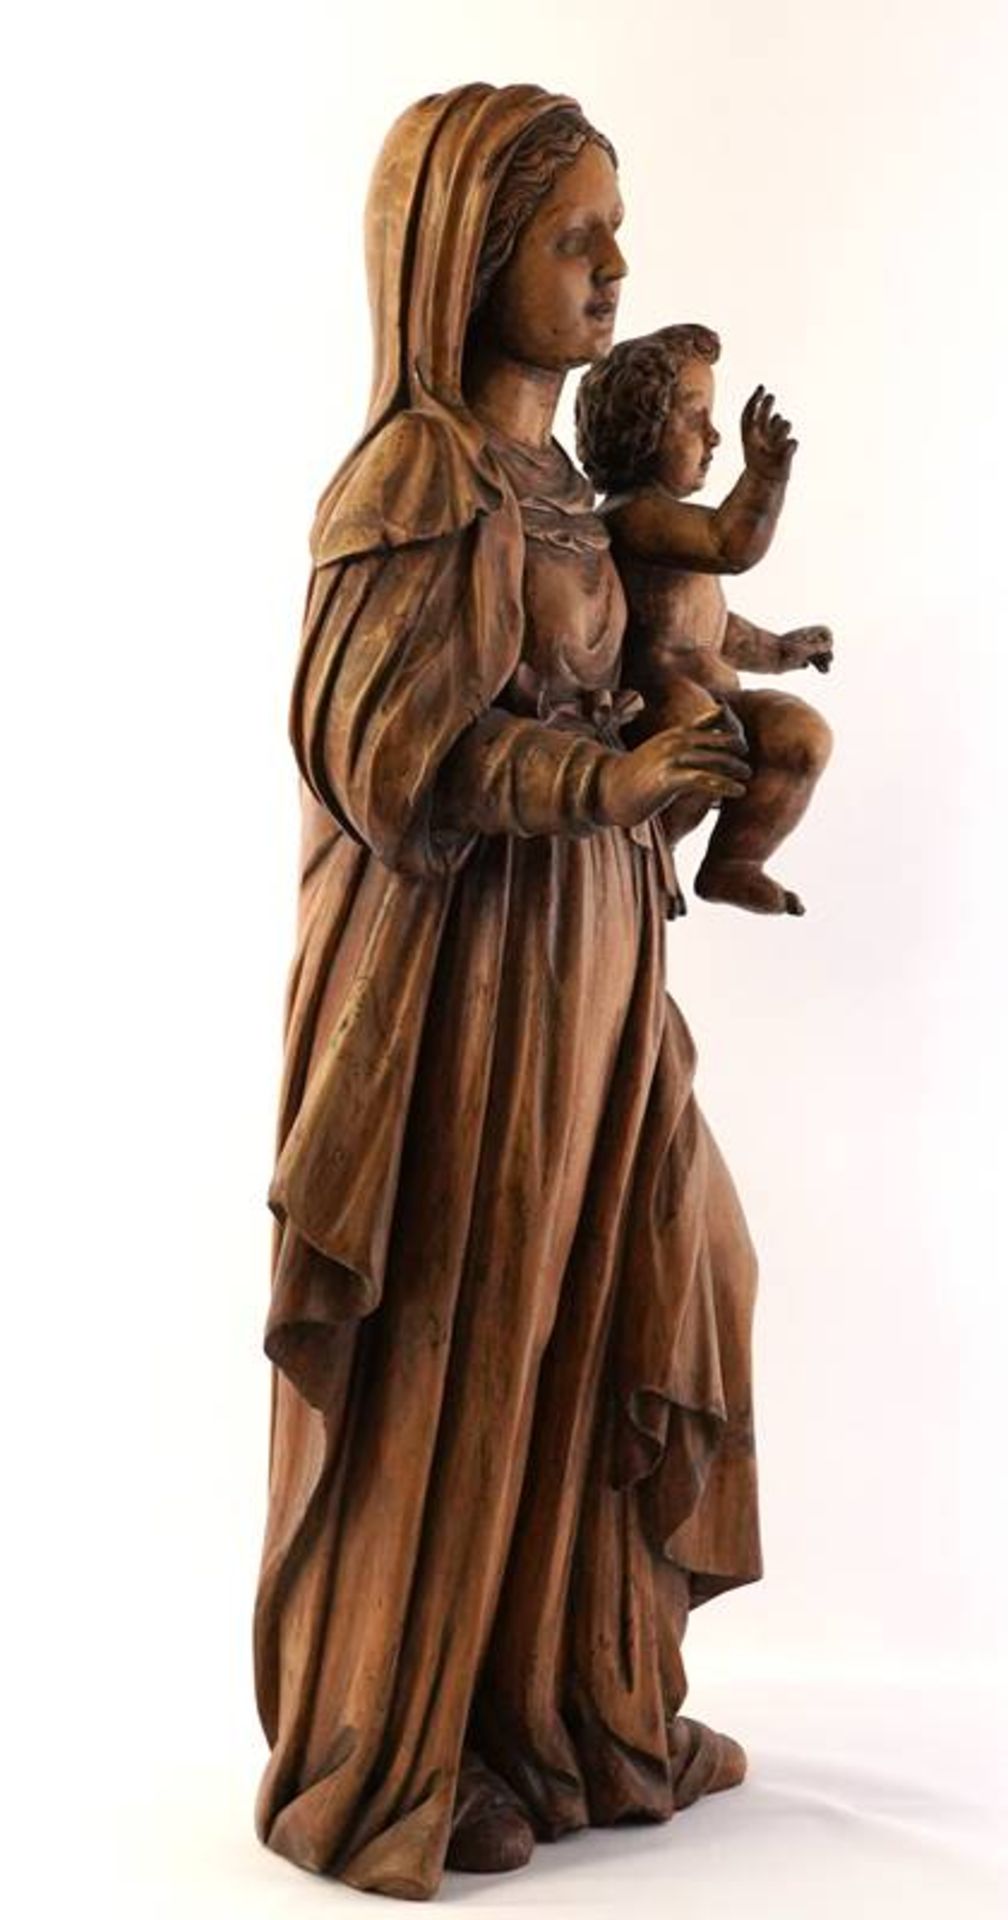 Mary with child - Image 4 of 6